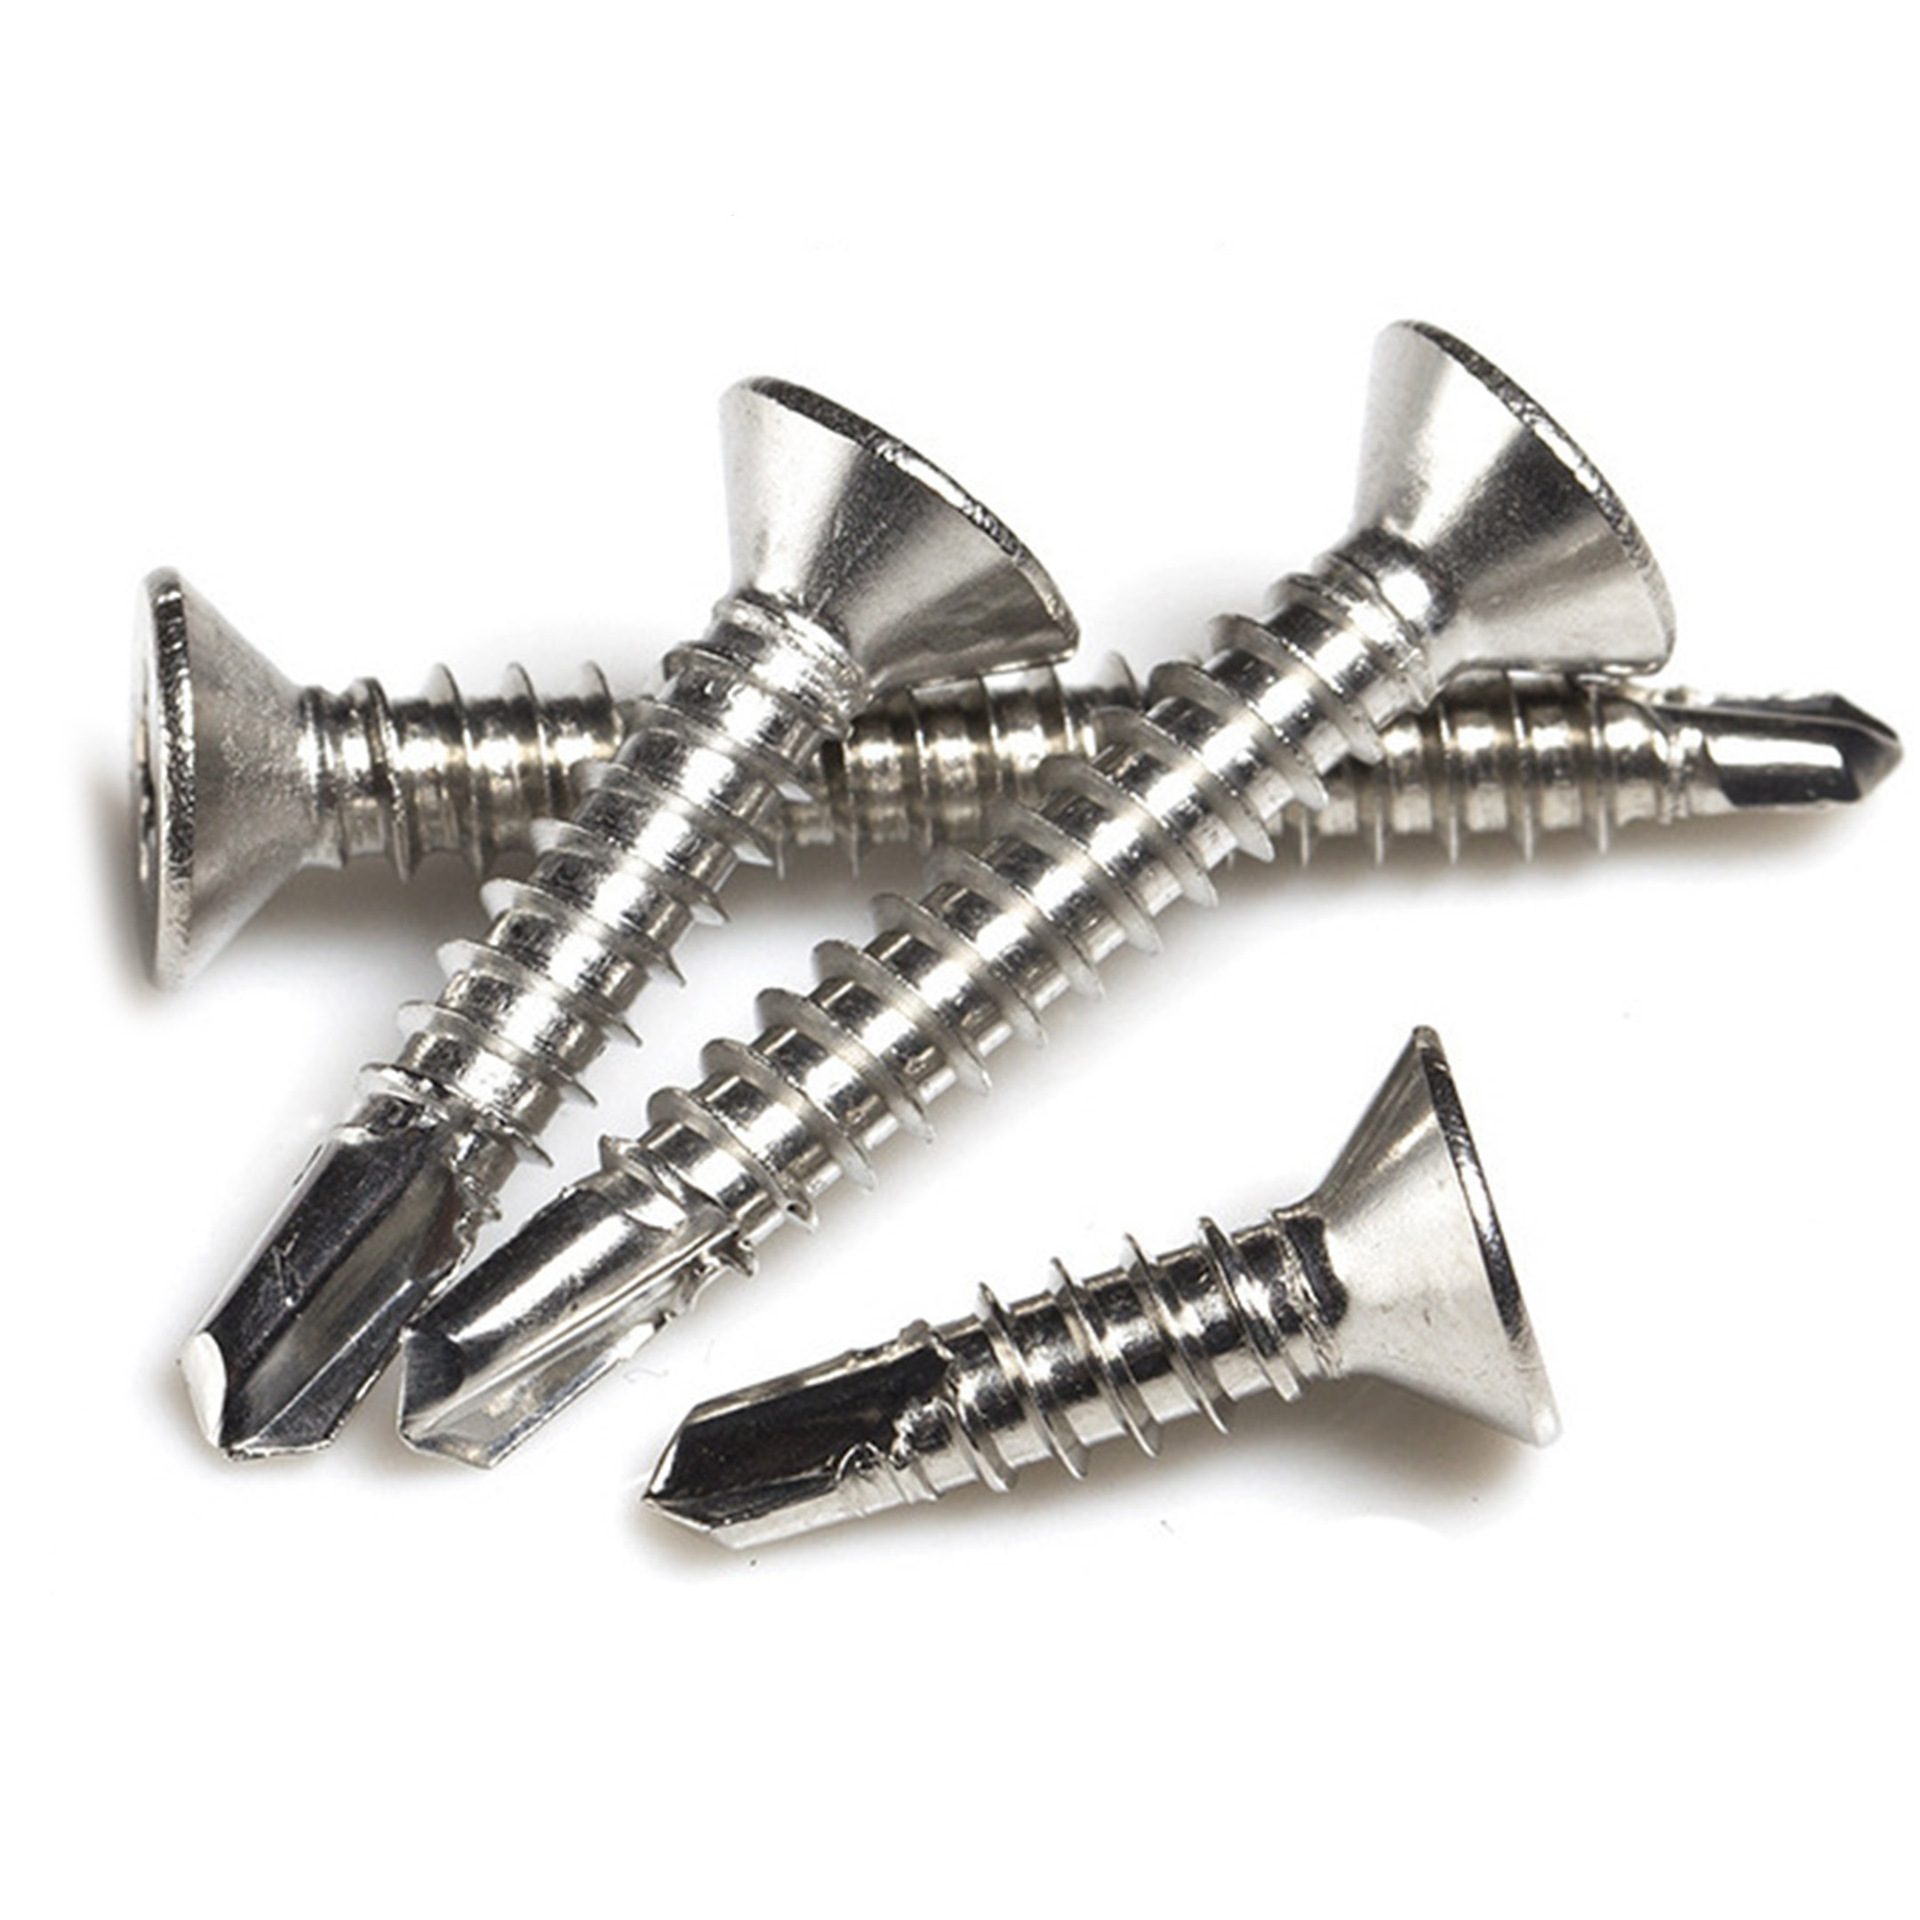 M6.3 304 Stainless Steel Phillips Flat Head Drilling Self-Tapping Screws